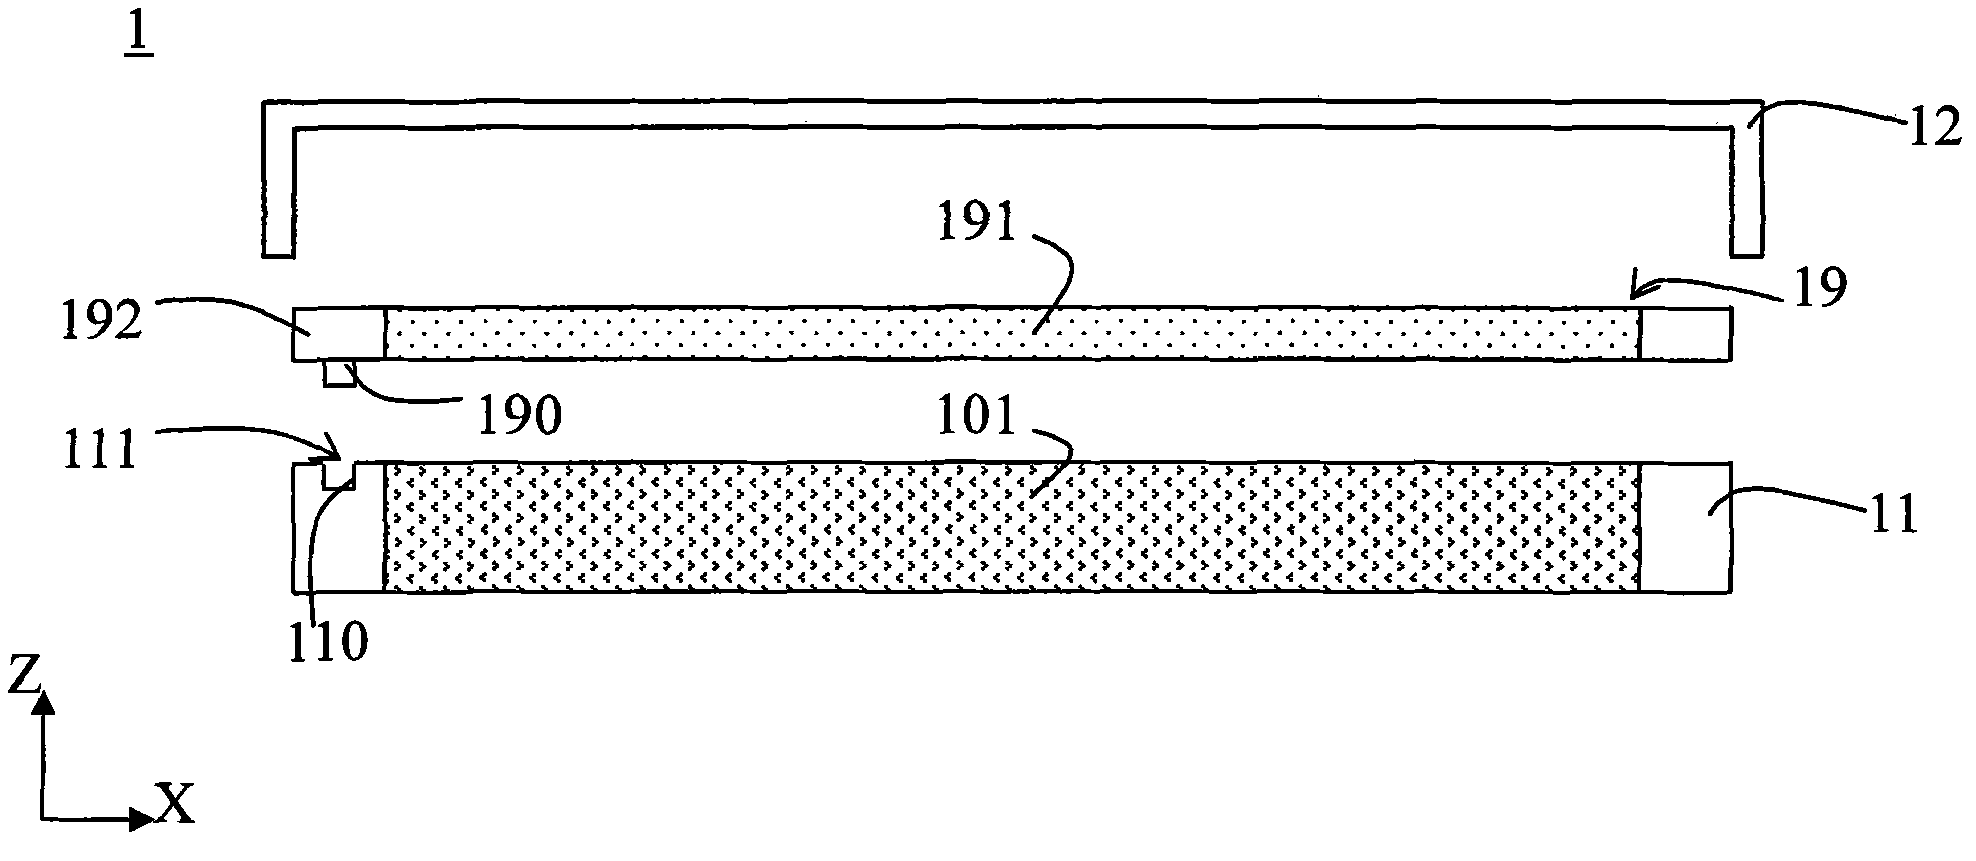 Display module integrating touch panel and assembling method thereof